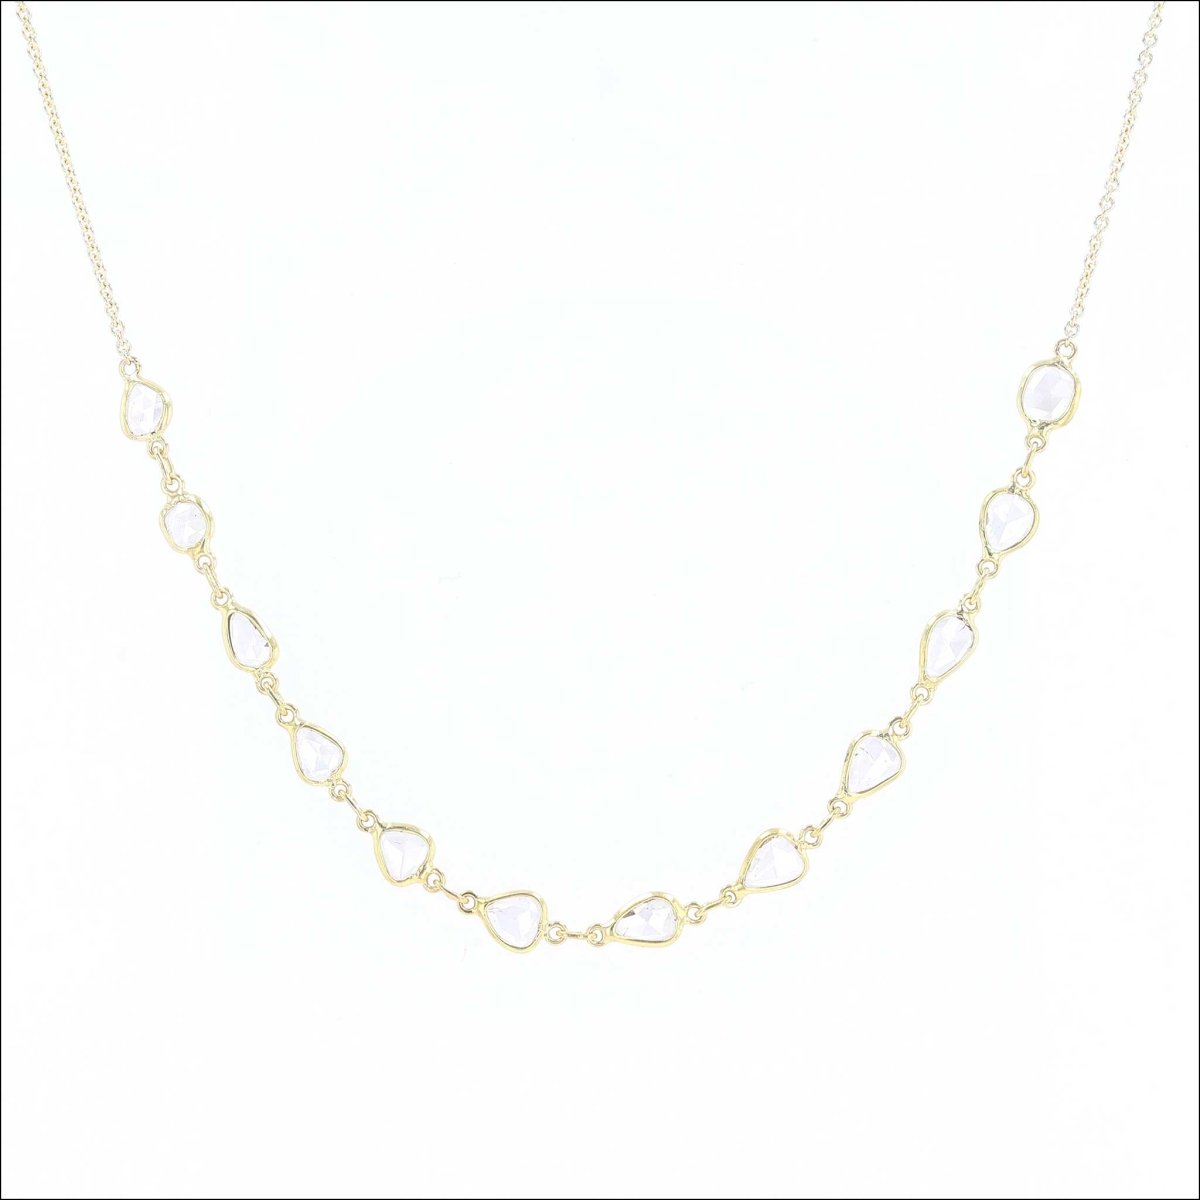 Rose Cut Pear and Cushion Diamond Slice Necklace 18KY 18" - JewelsmithNecklaces